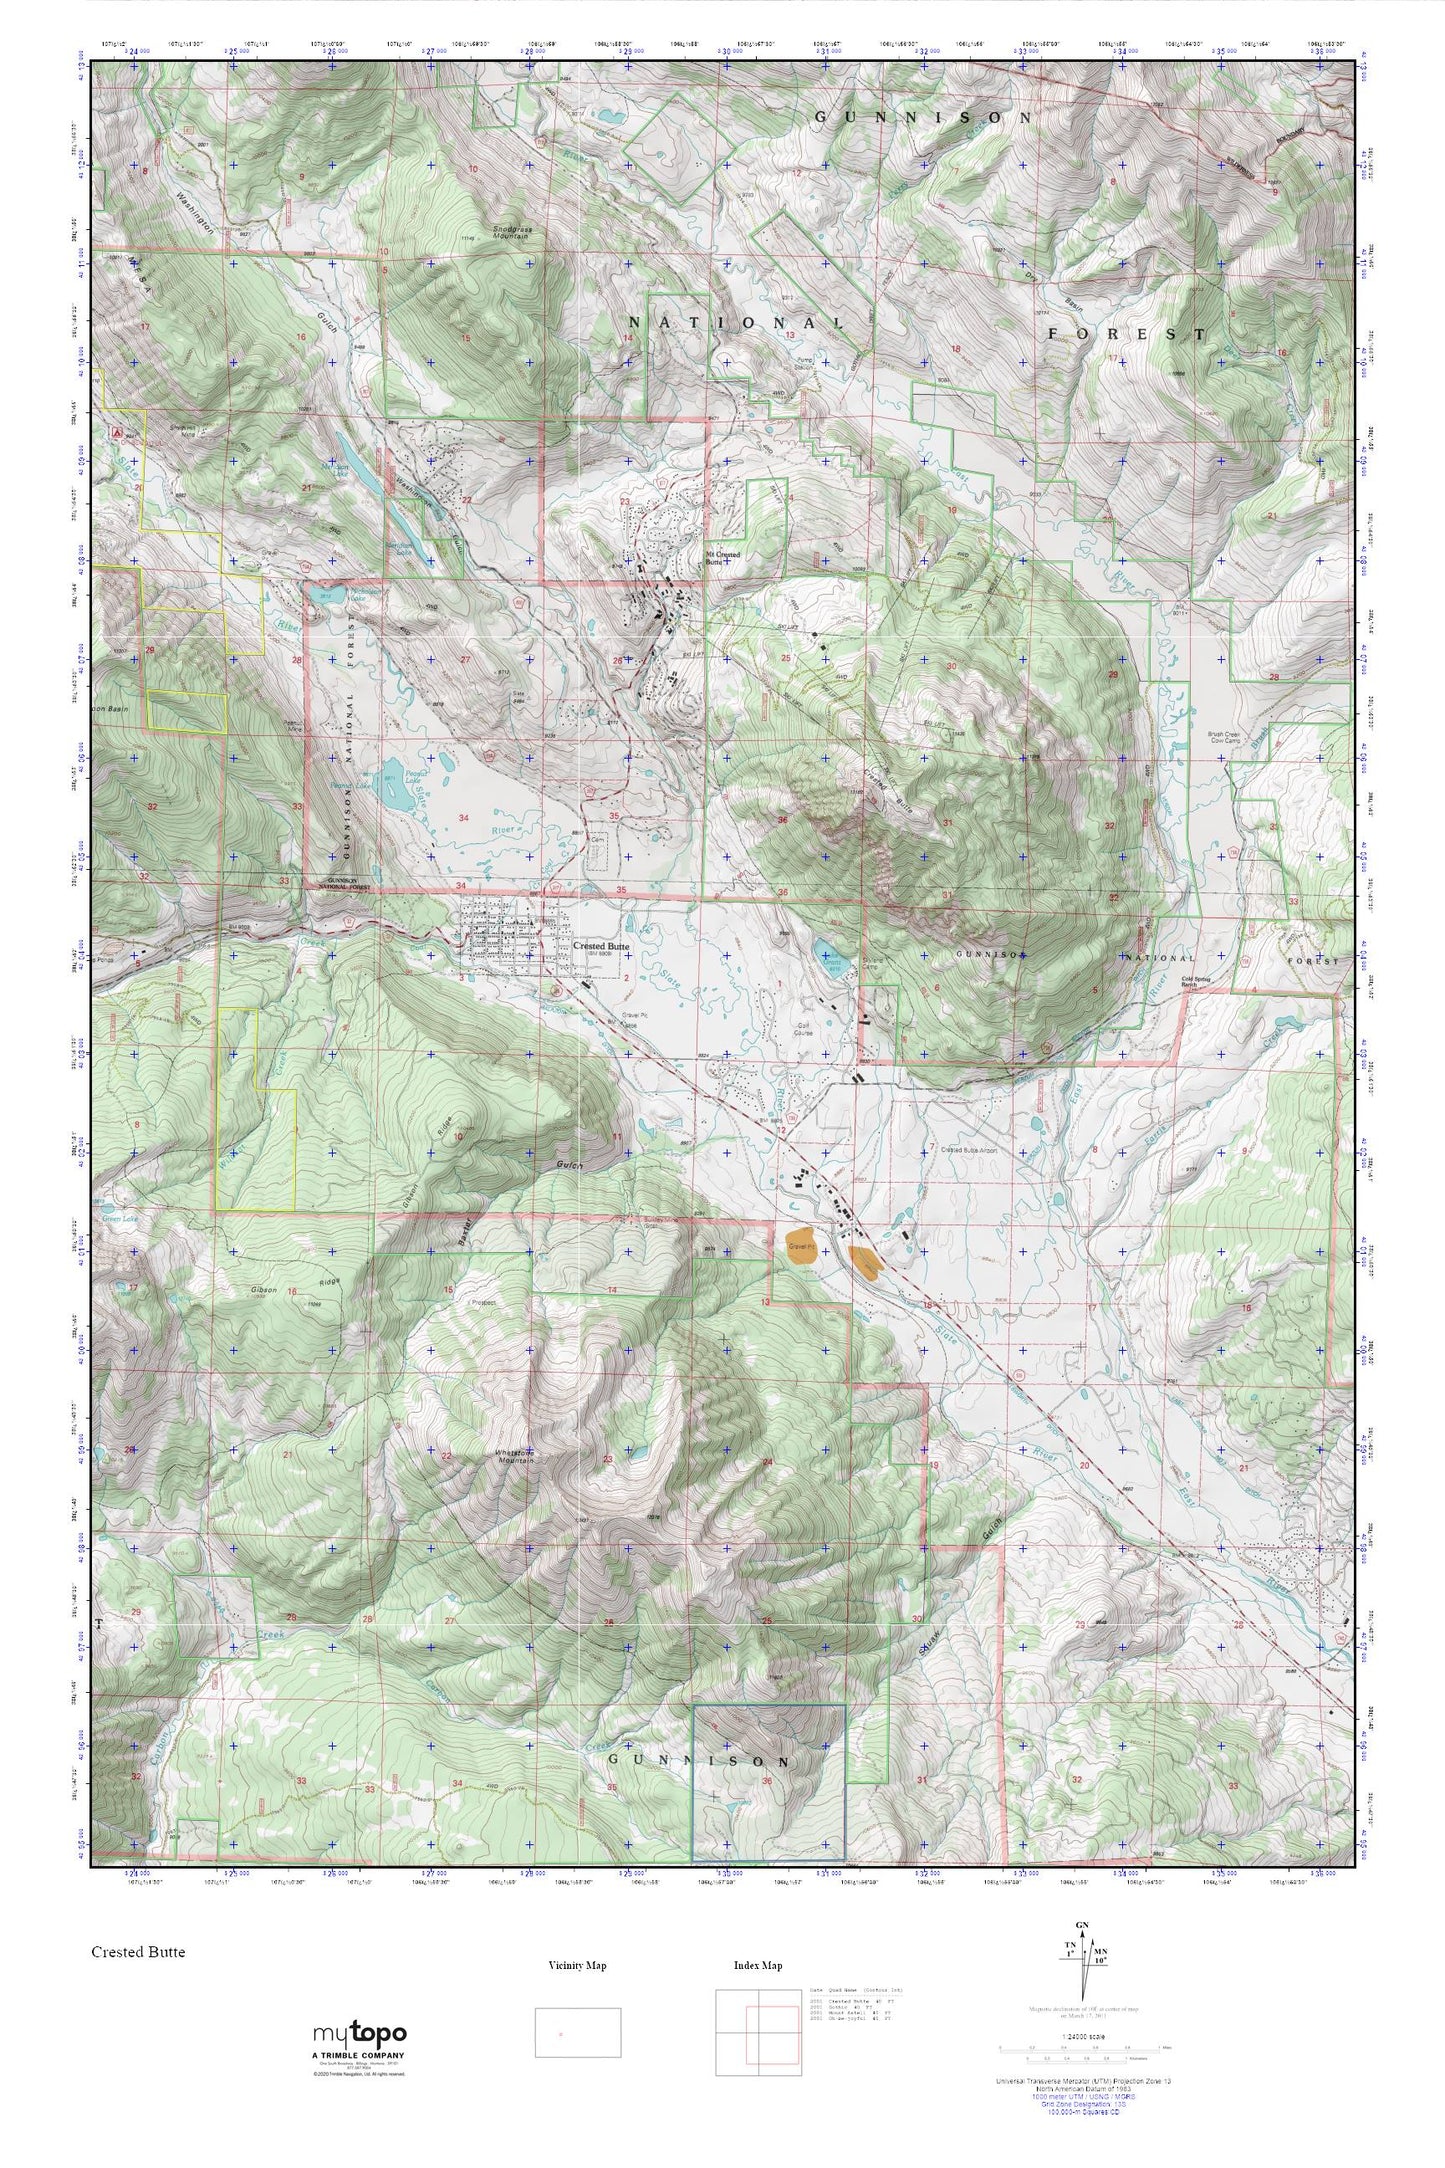 Crested Butte MyTopo Explorer Series Map Image